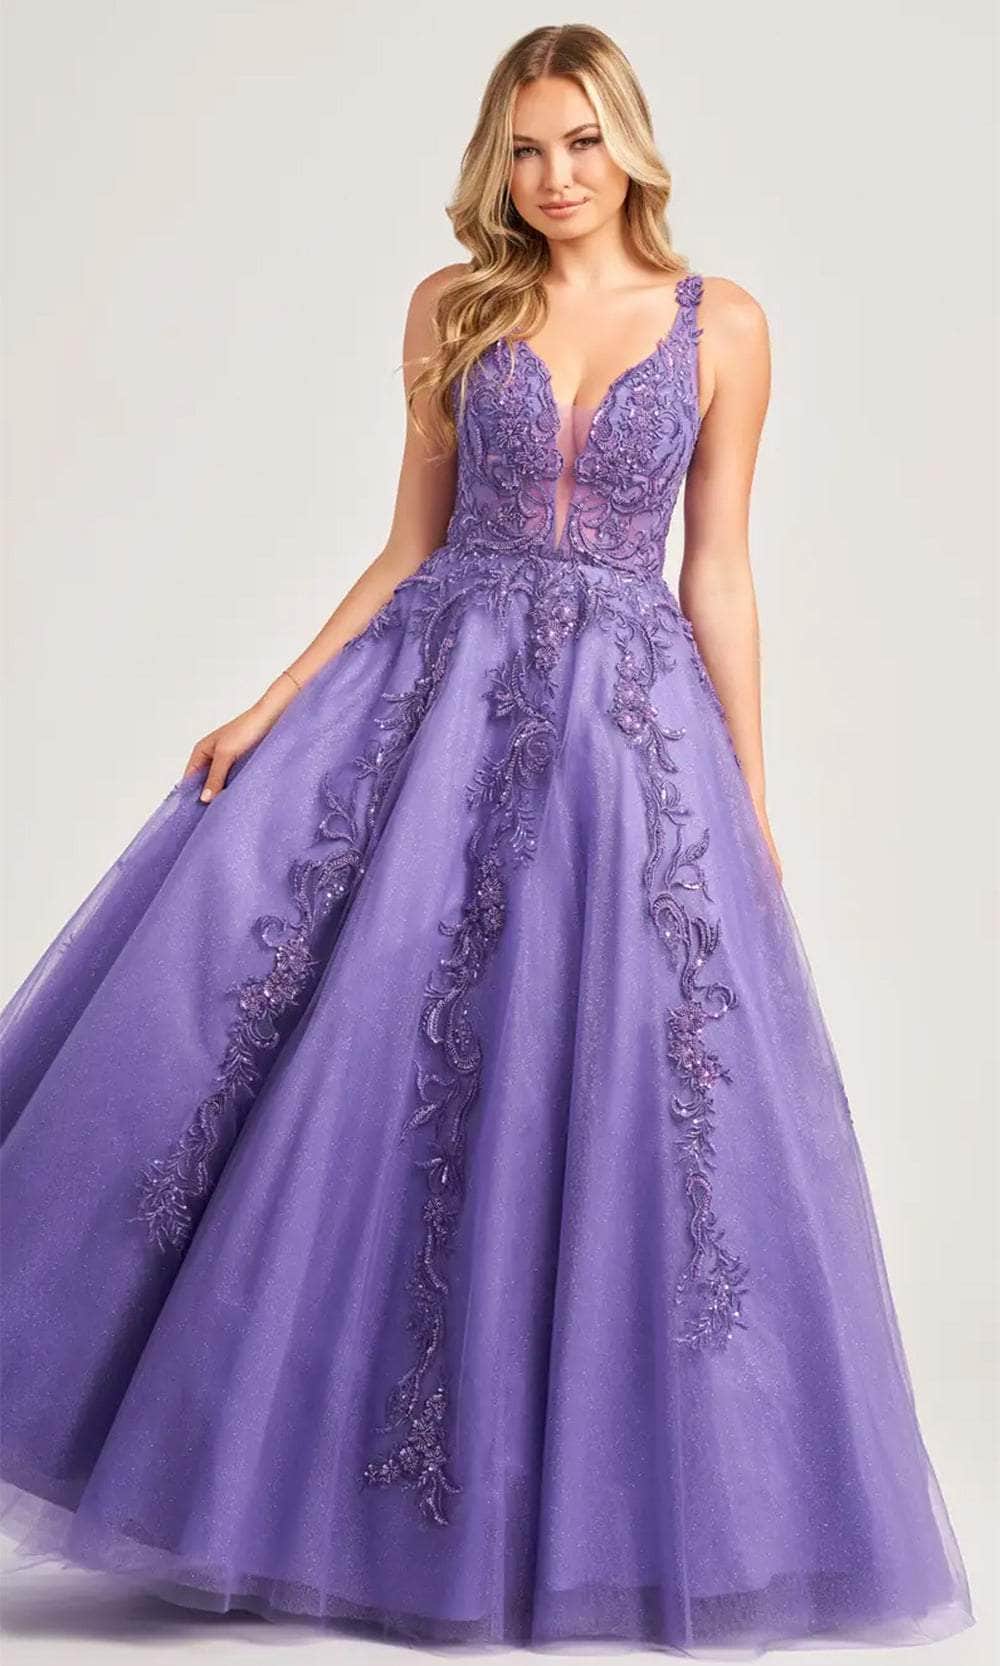 Image of Colette By Daphne CL5261 - Sleeveless Beaded Prom Dress